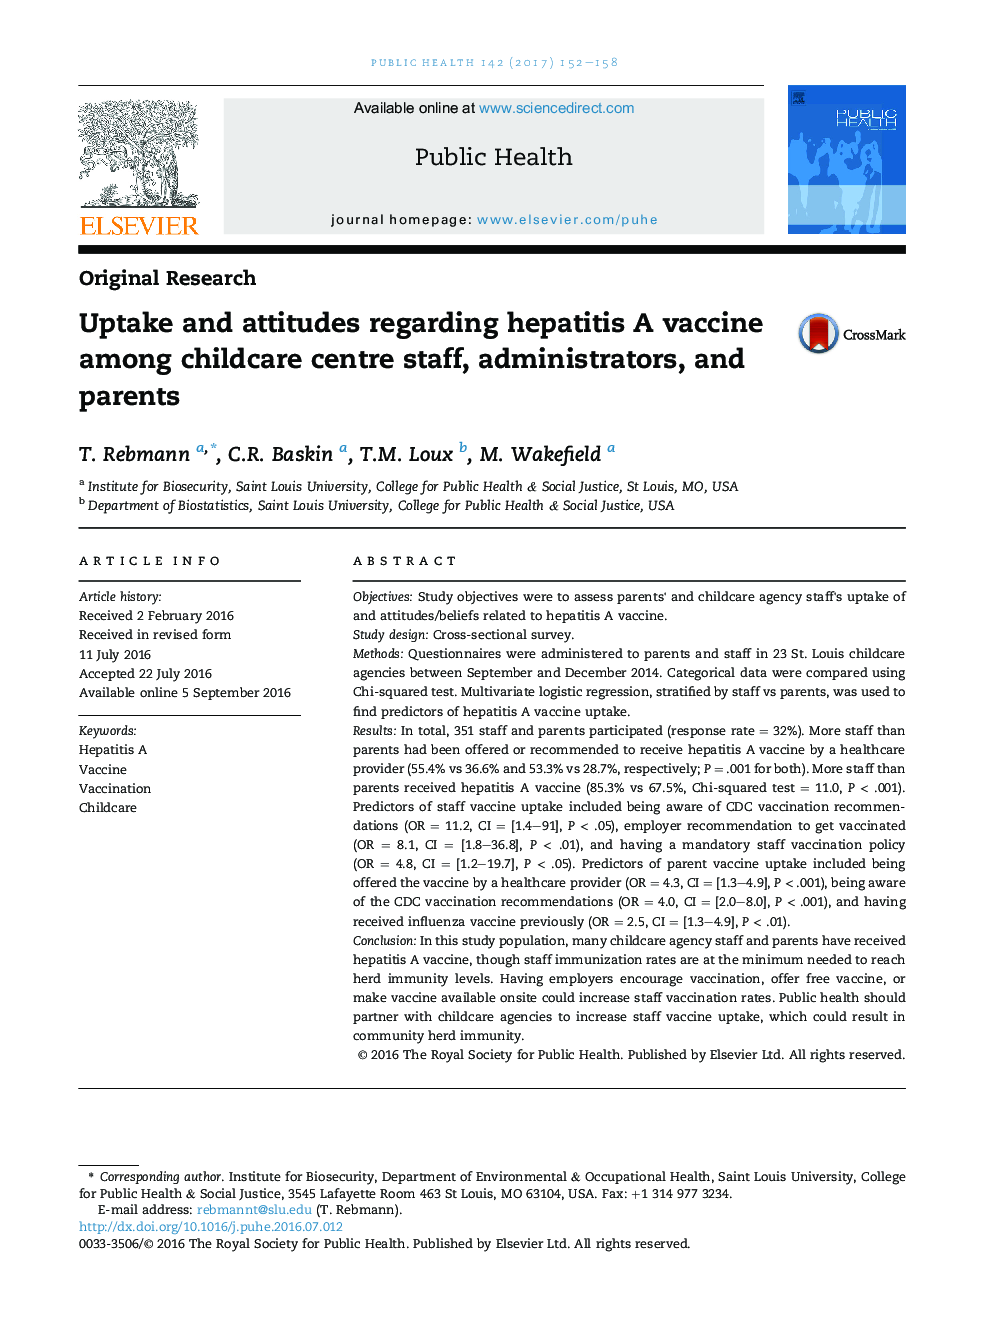 Uptake and attitudes regarding hepatitis A vaccine among childcare centre staff, administrators, and parents